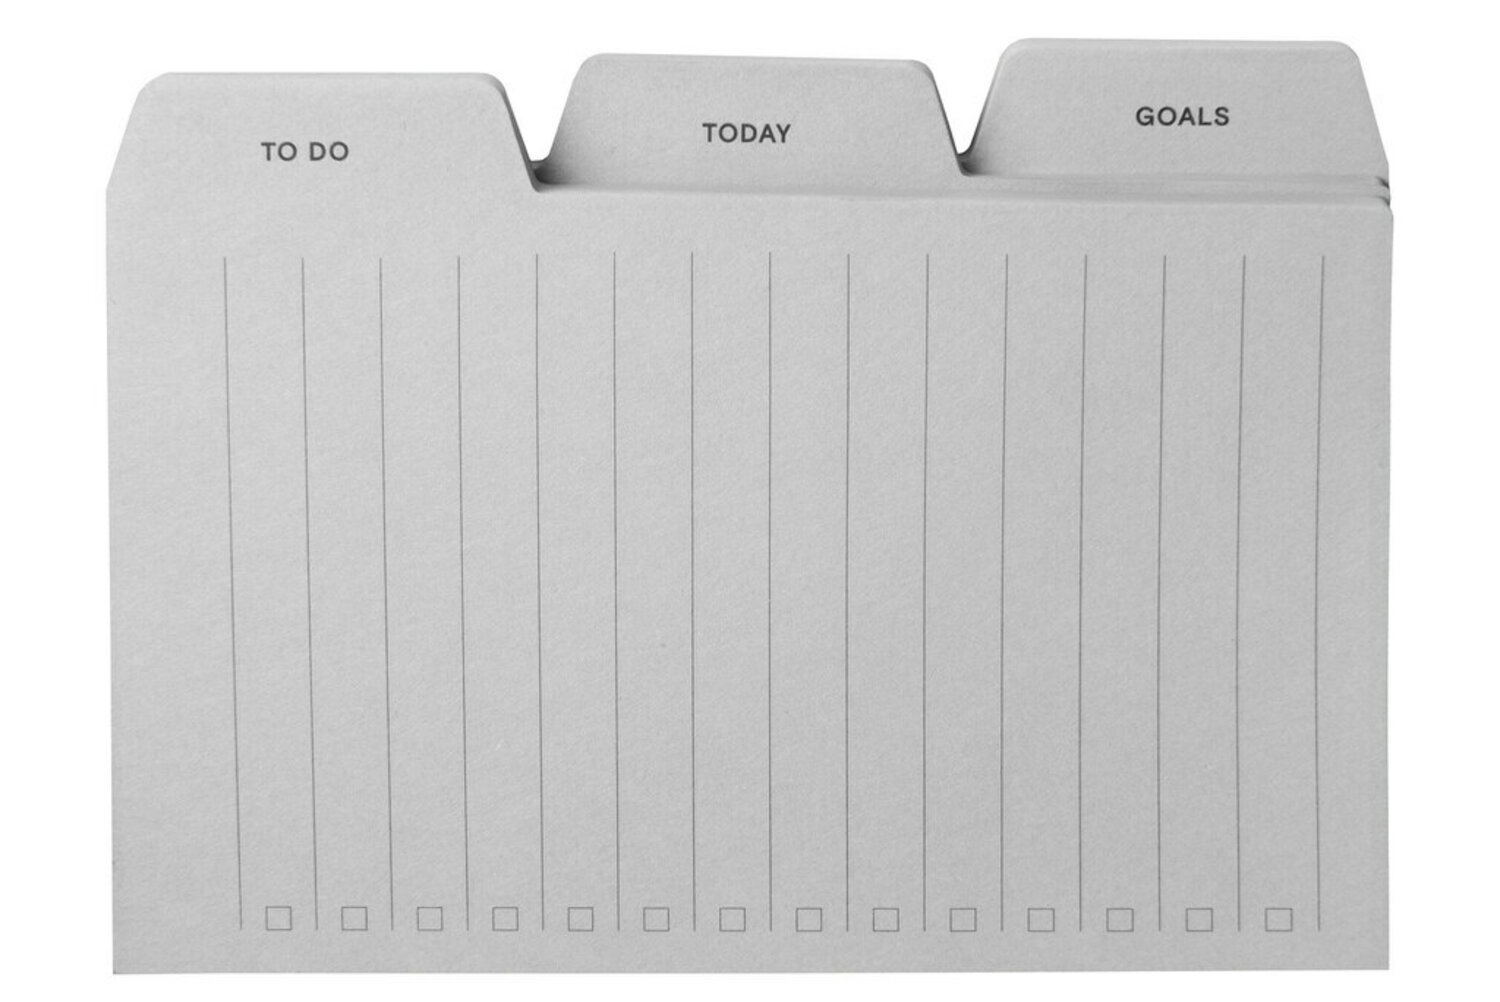 7100233968 - Post-it Printed Notes NTD-TAB-GRY, 3.9 in x 2.9 in (99 mm x 73 mm)